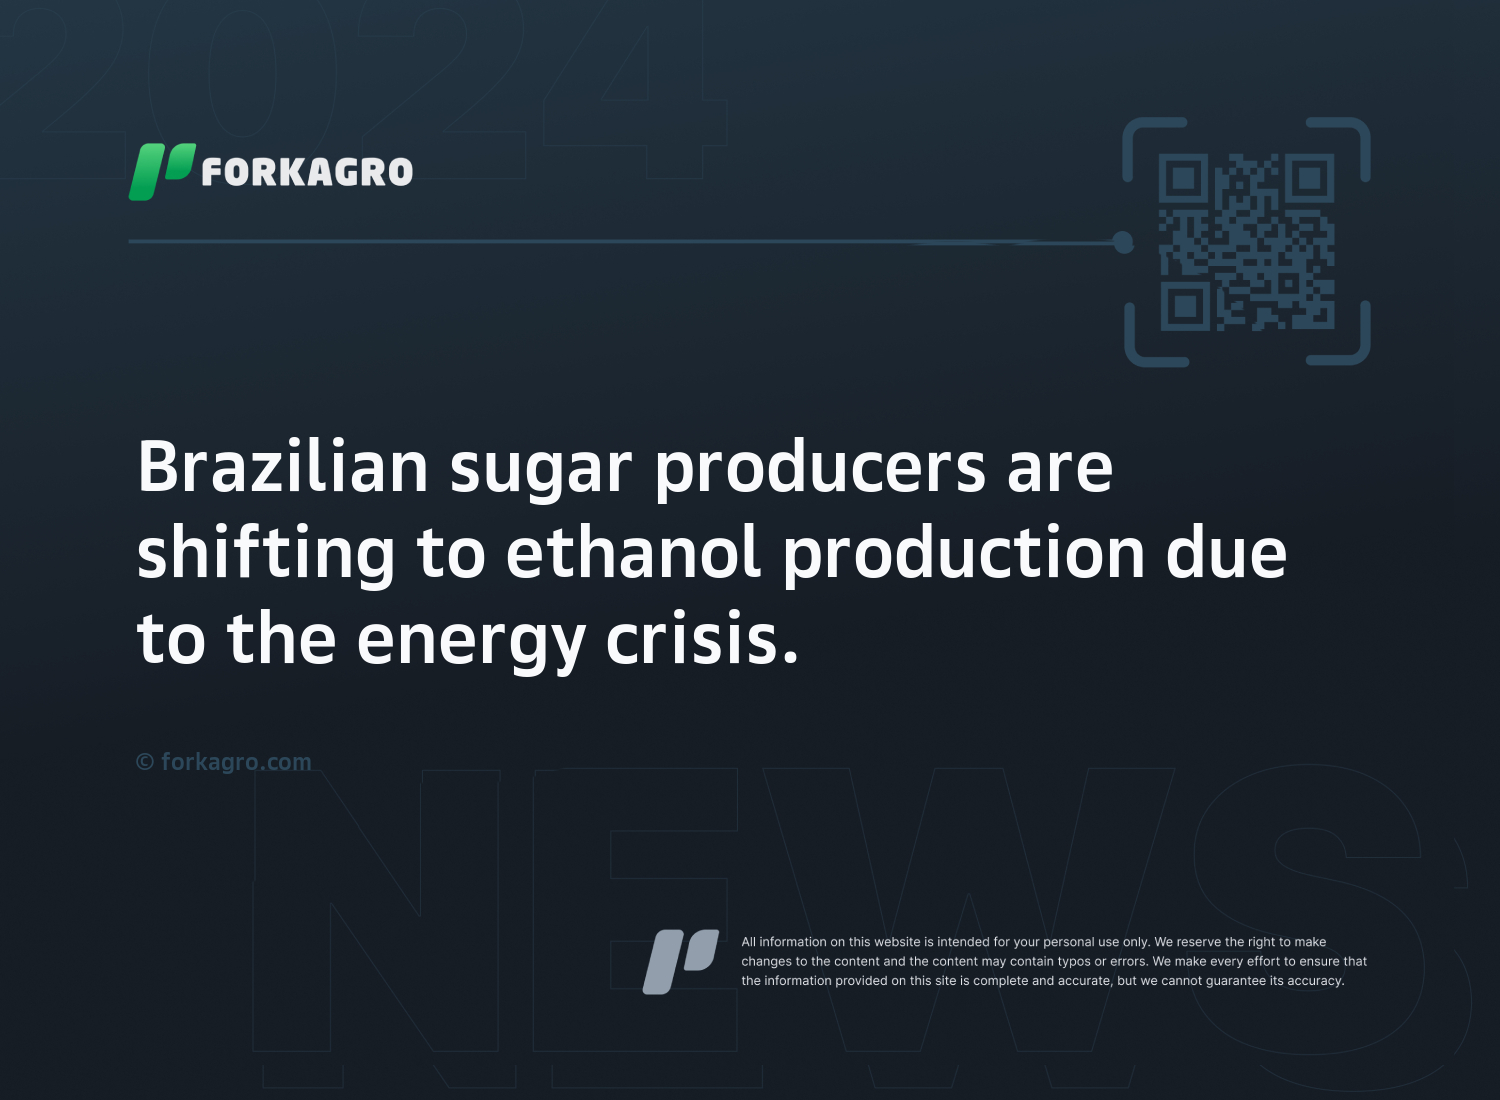 Brazilian sugar producers are shifting to ethanol production due to the energy crisis.